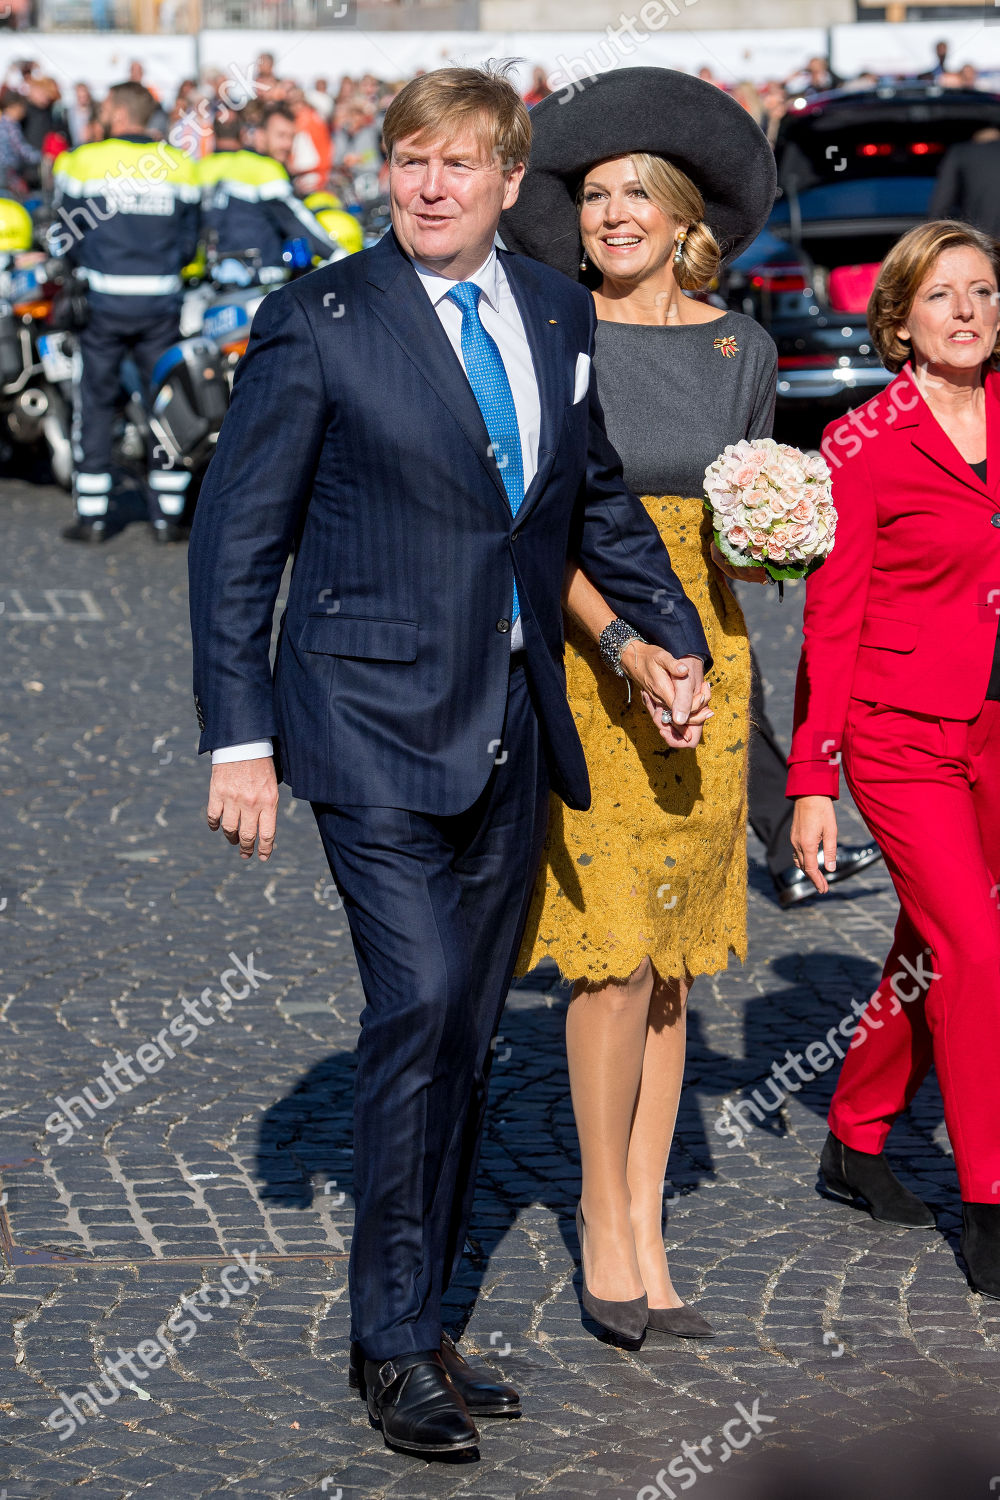 king-willem-alexander-and-queen-maxima-visit-to-germany-shutterstock-editorial-9921325p.jpg